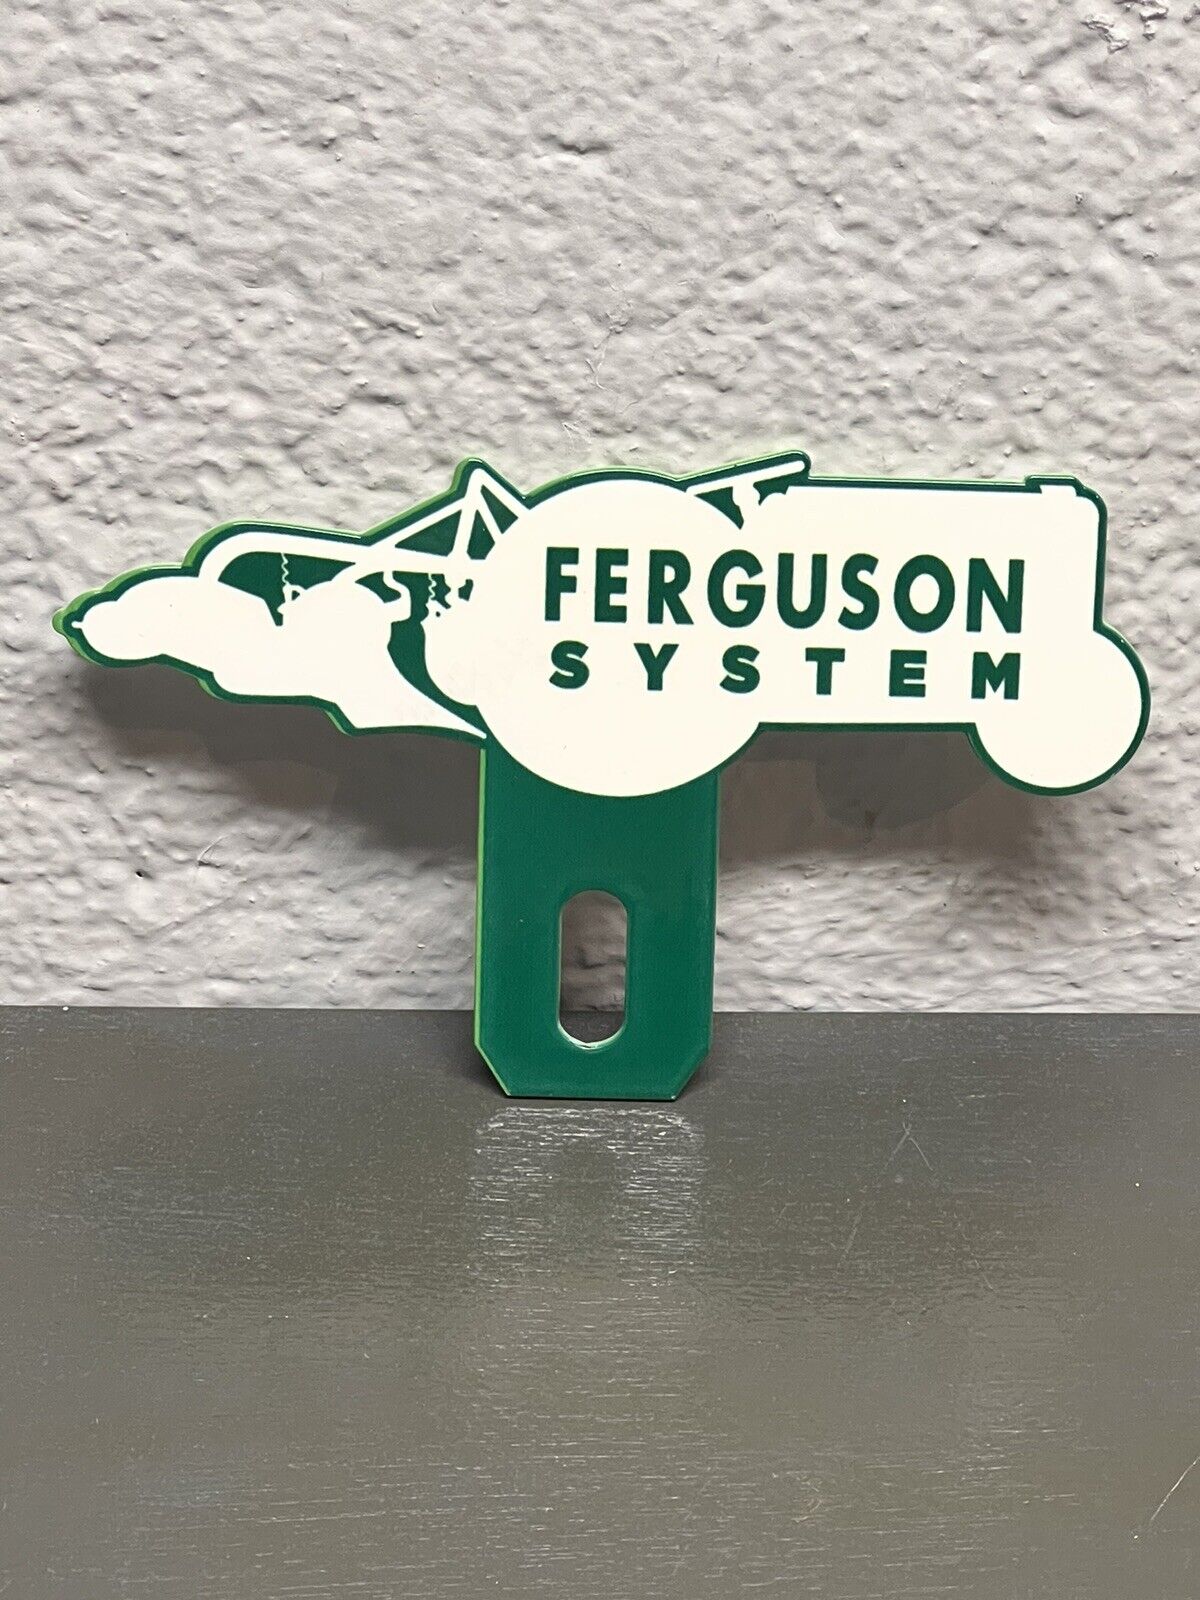 FERGUSON System Metal Plate Topper Farm Gas Oil Agriculture Tractor Sign Diesel